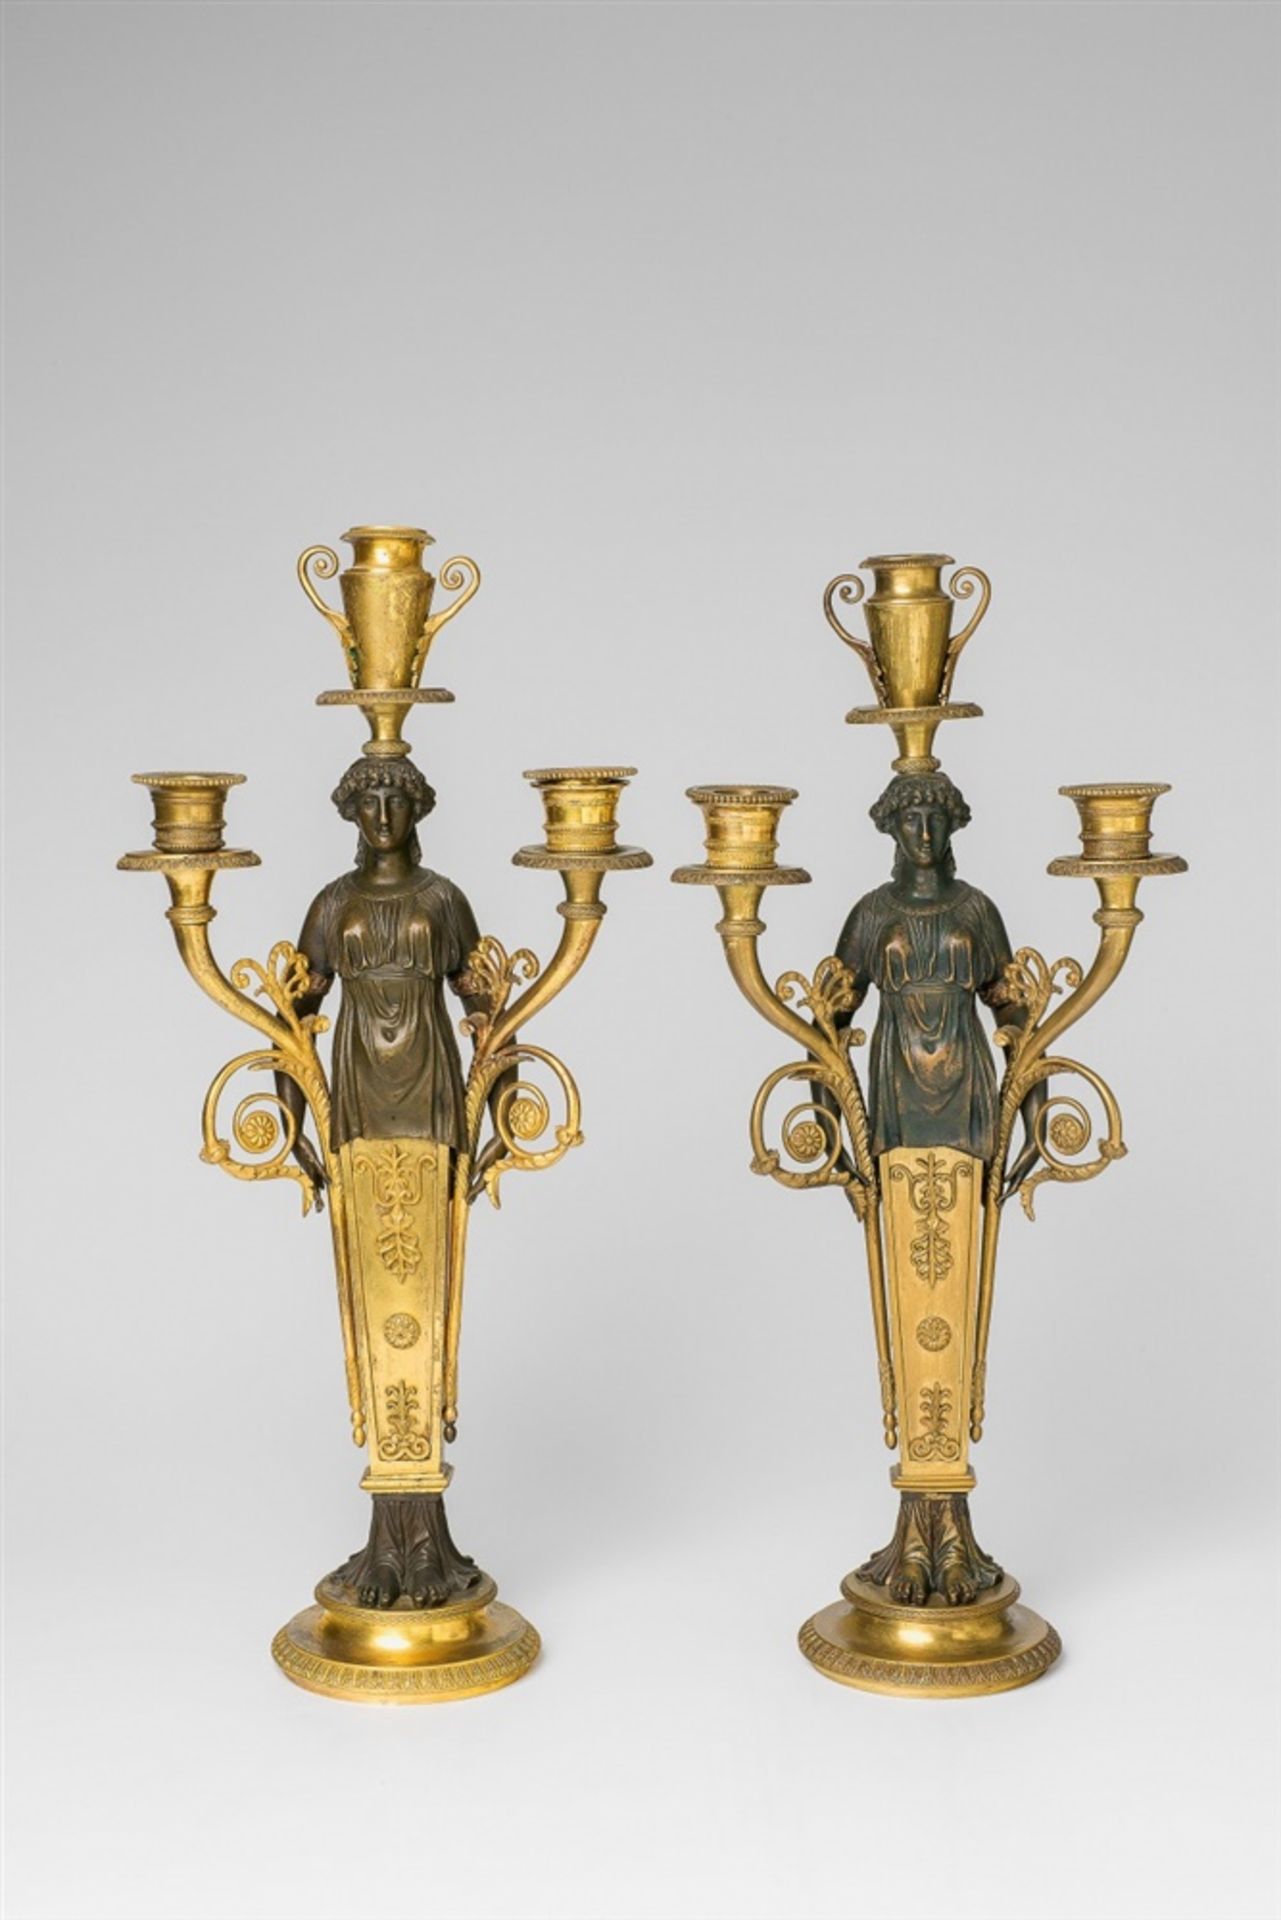 A pair of rare Empire ormolu candelabraCast in several parts and screw-mounted. Three flame